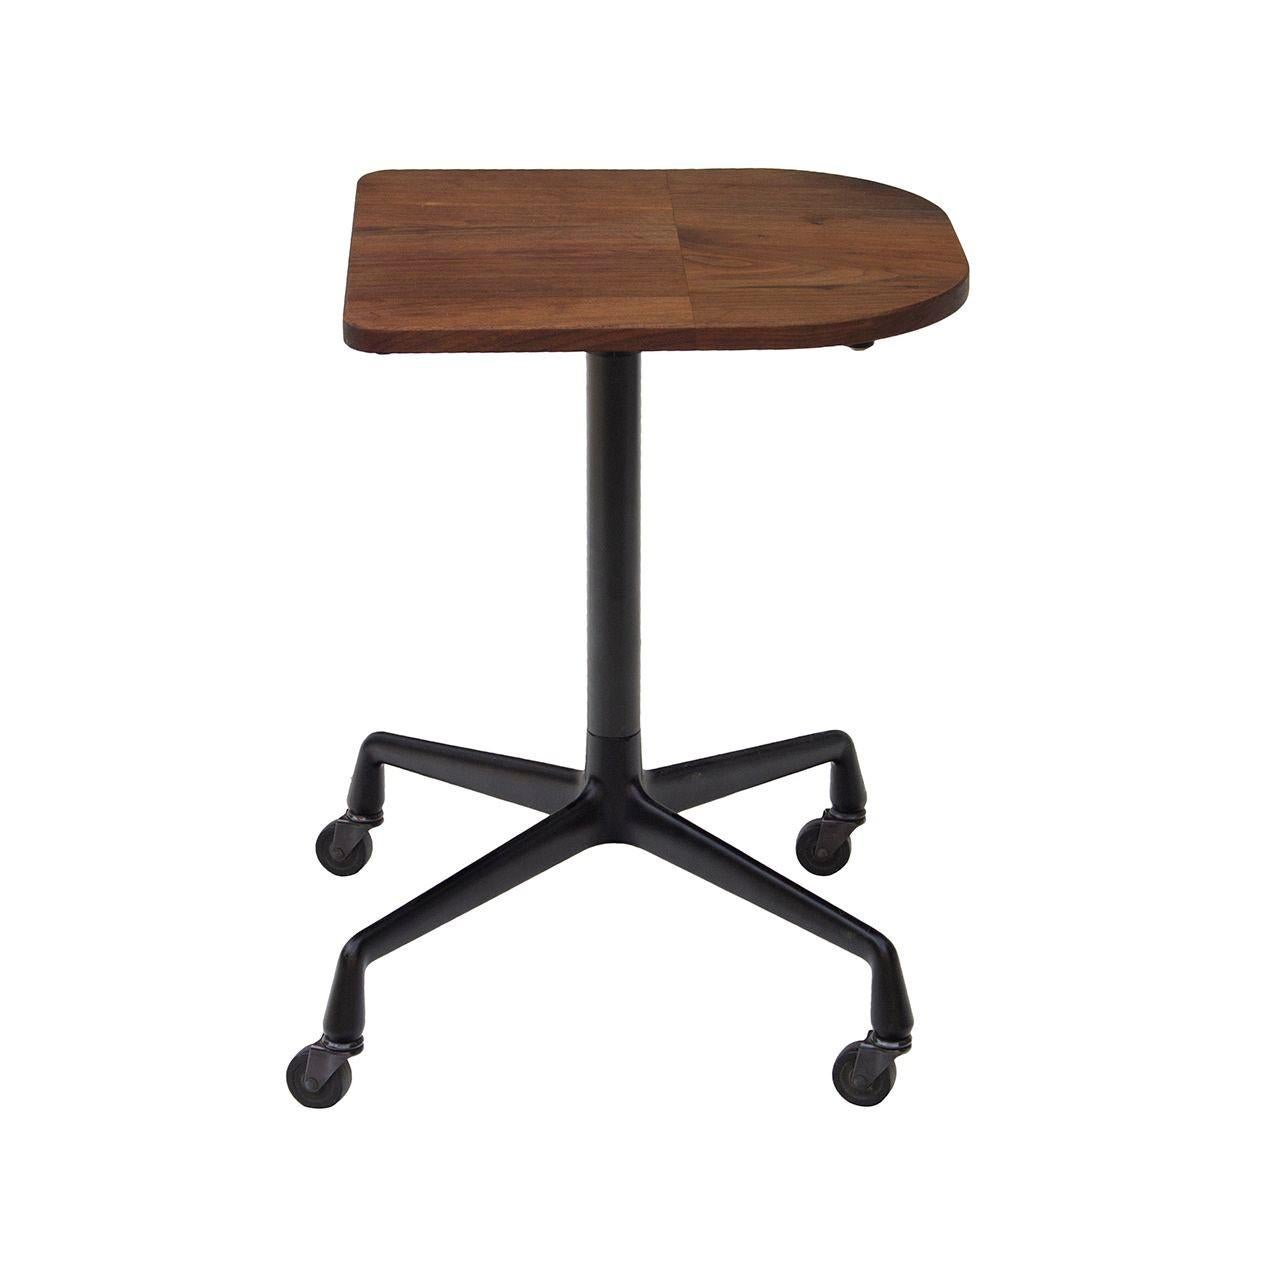 USA, 1970s
Vintage Herman Miller aluminum group table base on casters- with a custom made solid American black walnut top. The top was added to the base circa 2016 and is oiled walnut, and a solid chunk of it. This style table is such a usable